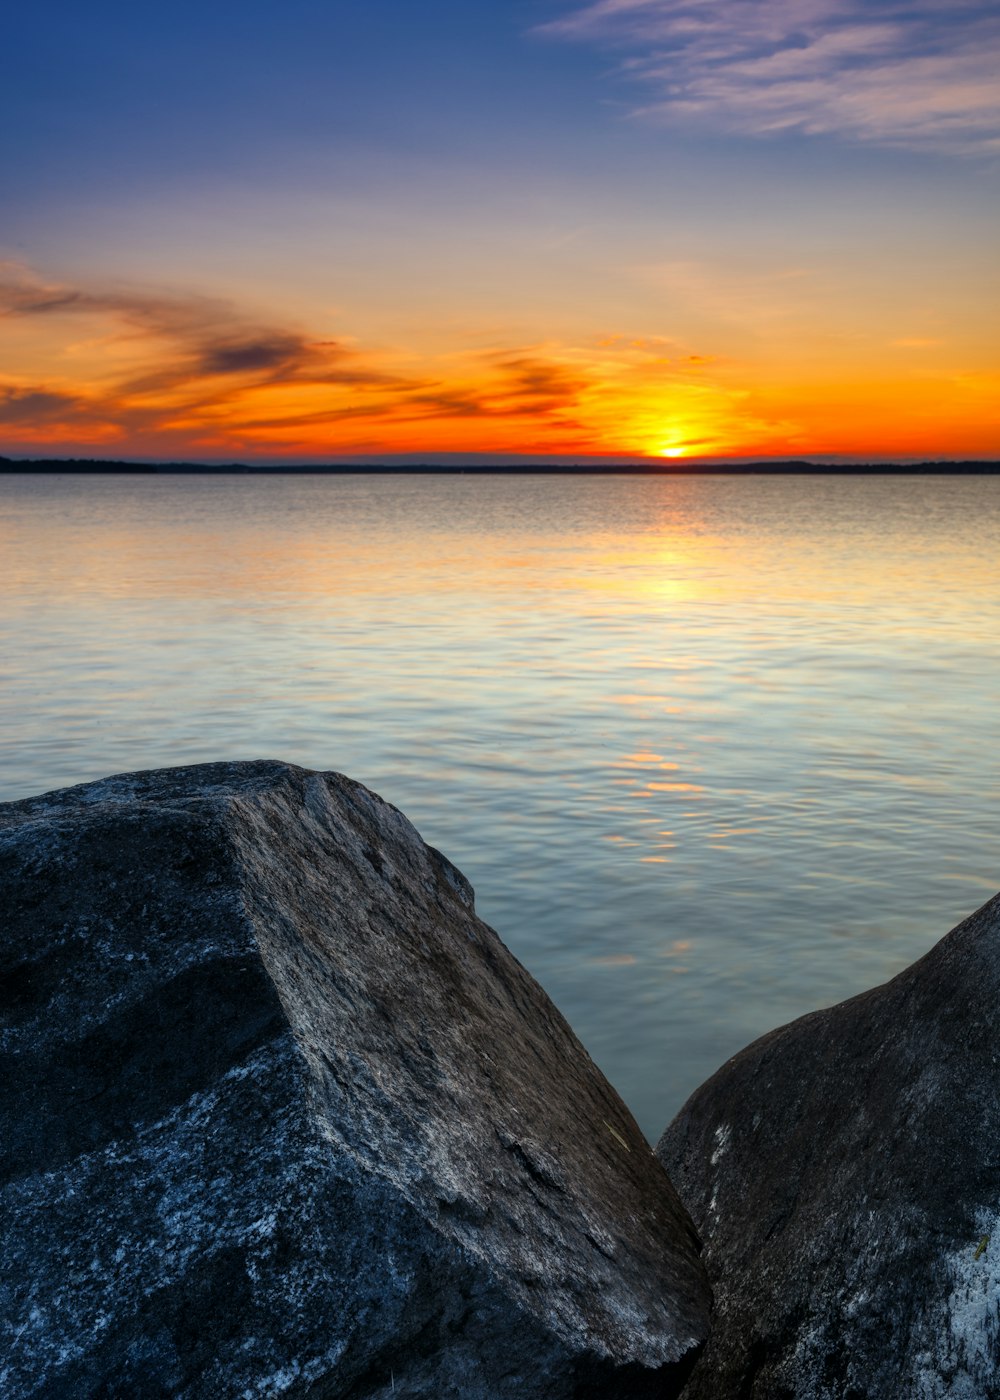 the sun is setting over the water with rocks in the foreground